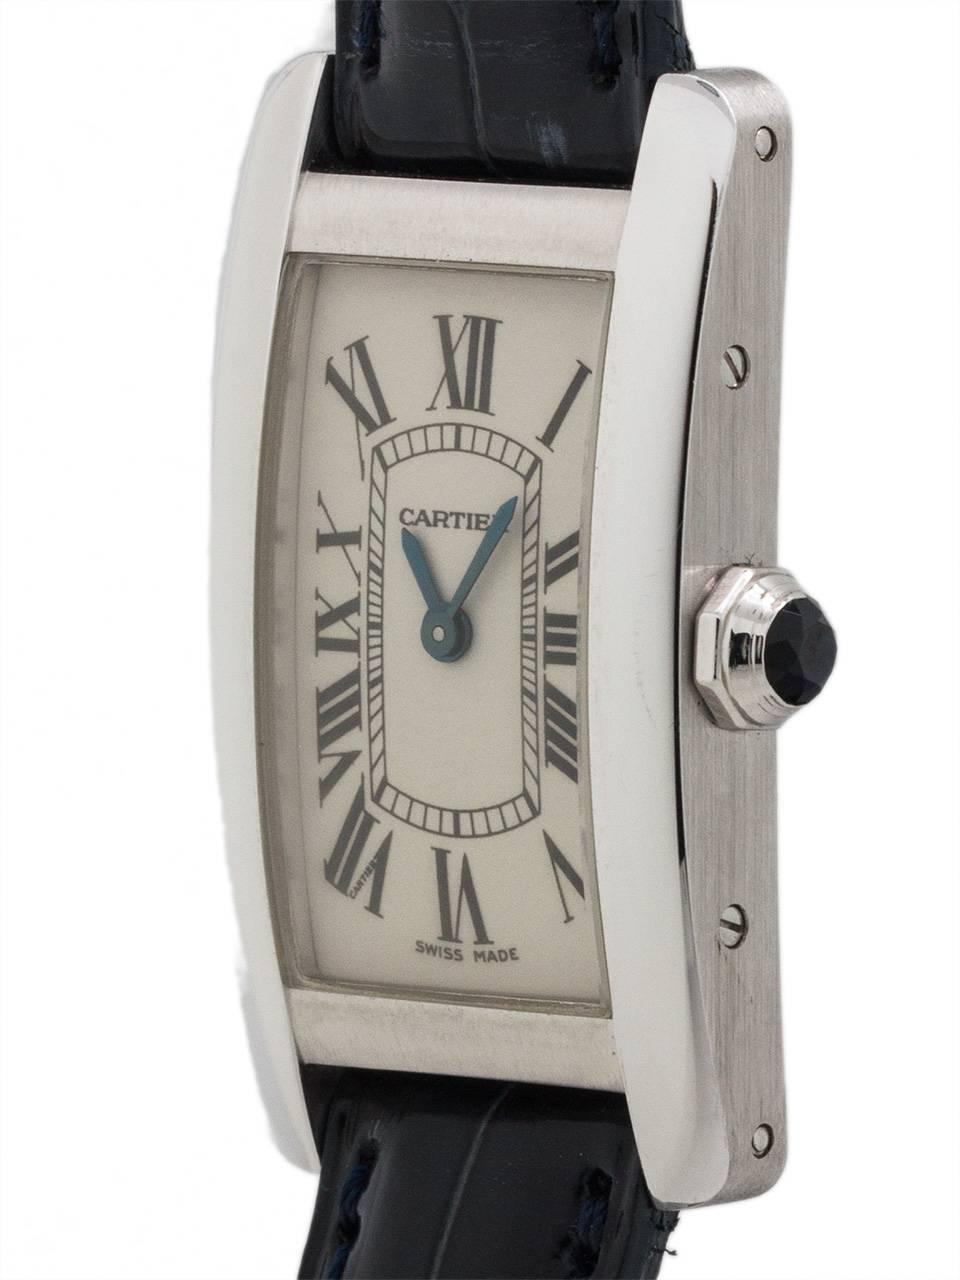 Pristine condition Cartier 18K white gold Tank American ref 2482 circa 2000. Featuring classic curvex style 20 X 35mm case secured by 8 side screws and 4 caseback screws. With classic original  silvered dial with Roman figures including Cartier